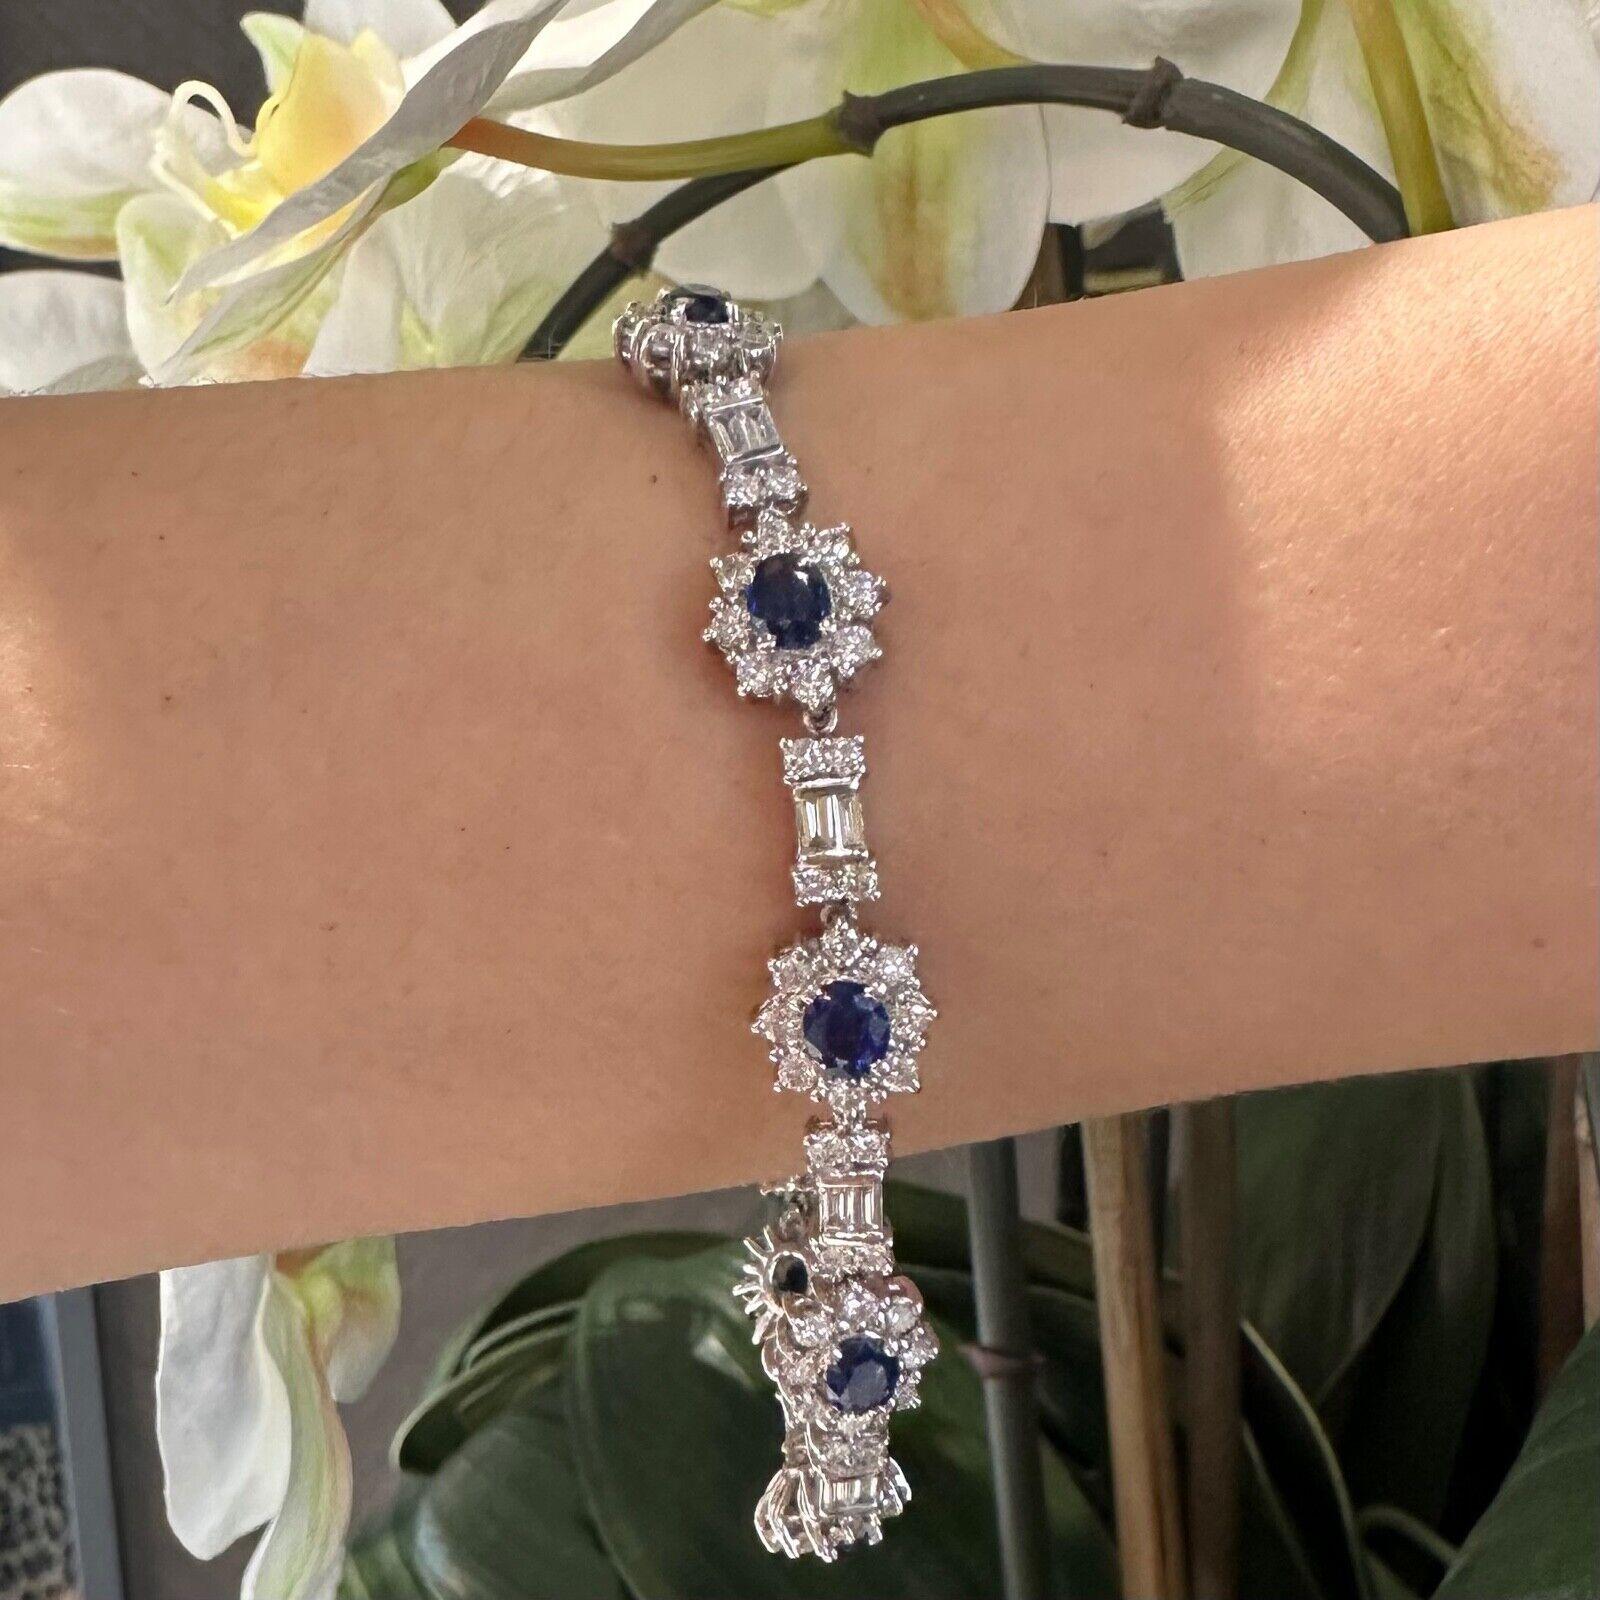 Metal: White Gold

Metal Purity: 18k

Stones: 8 Oval Blue Sapphire Stones, 106 Baguette and Round Diamonds

Diamond Carat Weight: approx. 8ct

Diamond Clarity: VS1 - VS2

Diamond Color: G - H

Sapphire Carat Weight: approx. 4.5 ct

Total Weight